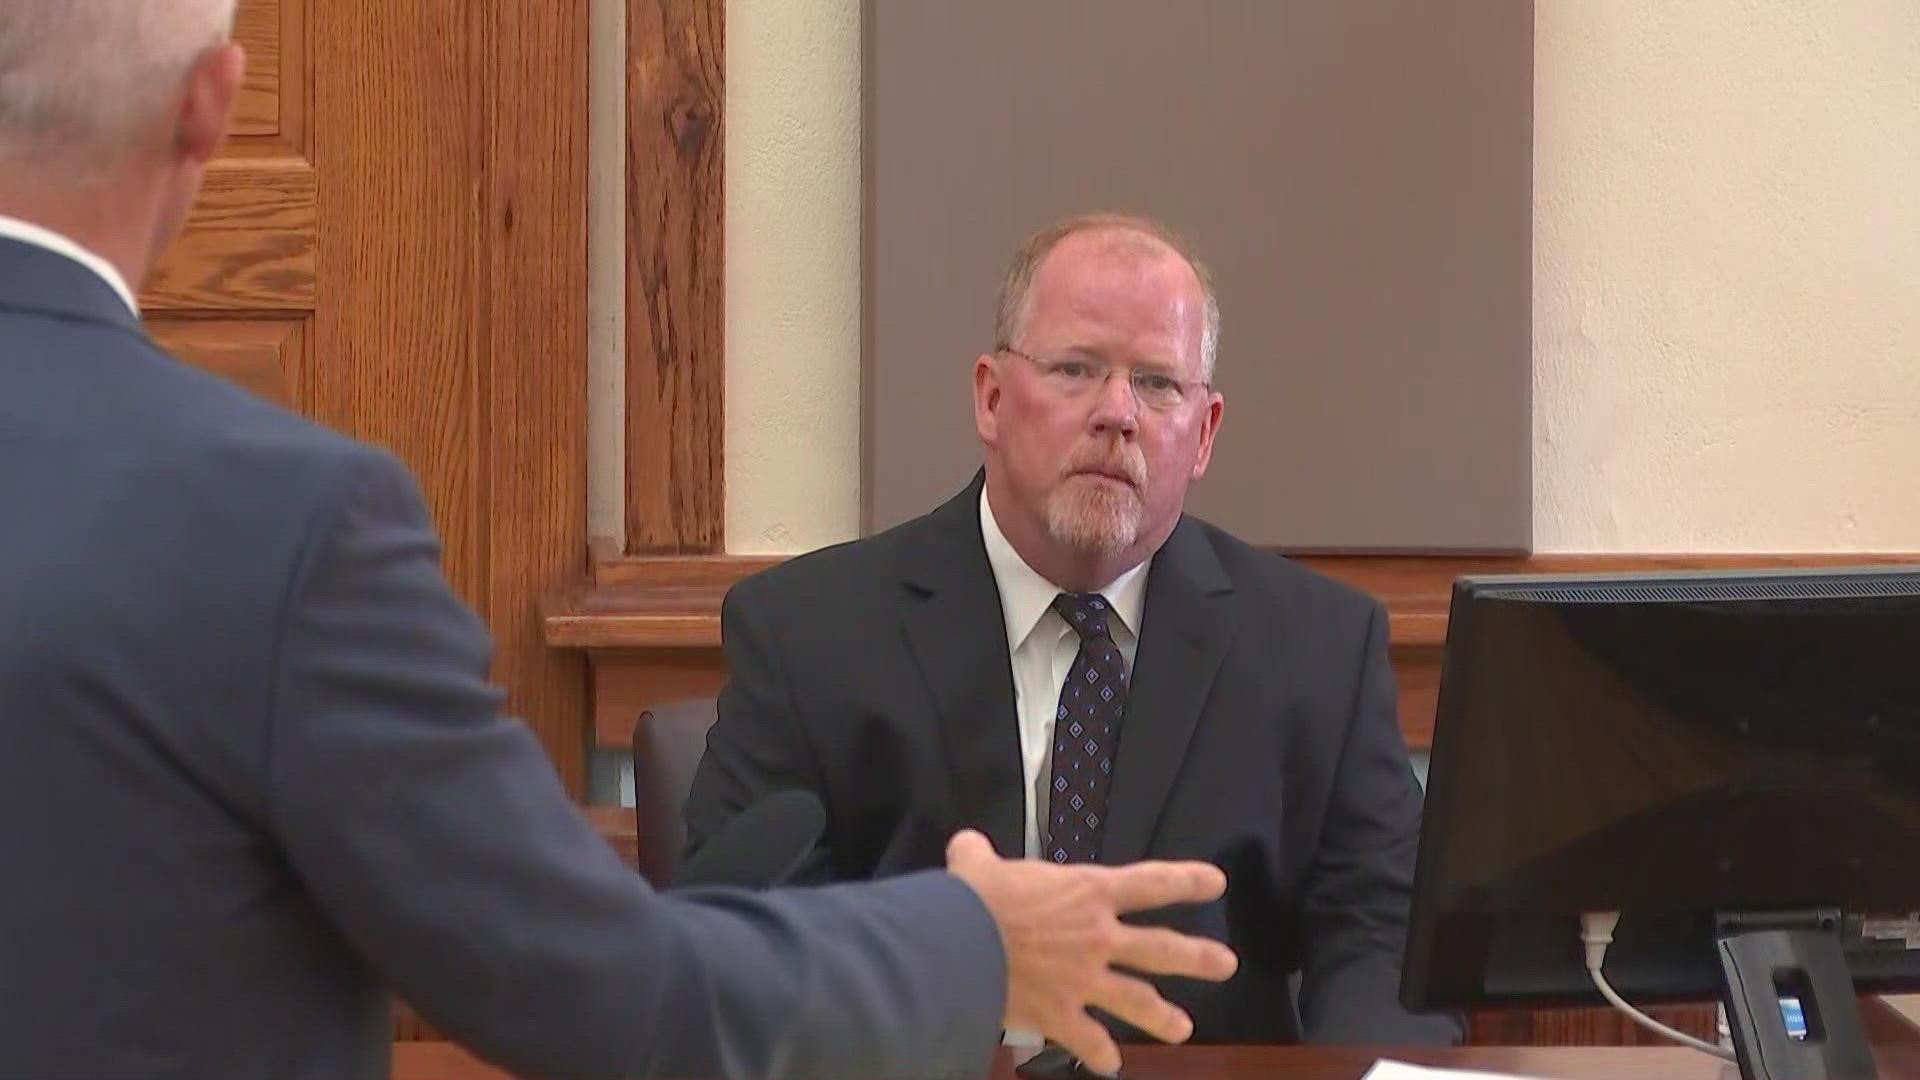 After a brief recess, Capt. Dykes finished his testimony for the state on his relationship with Grinstead and specifics of his job in law enforcement.